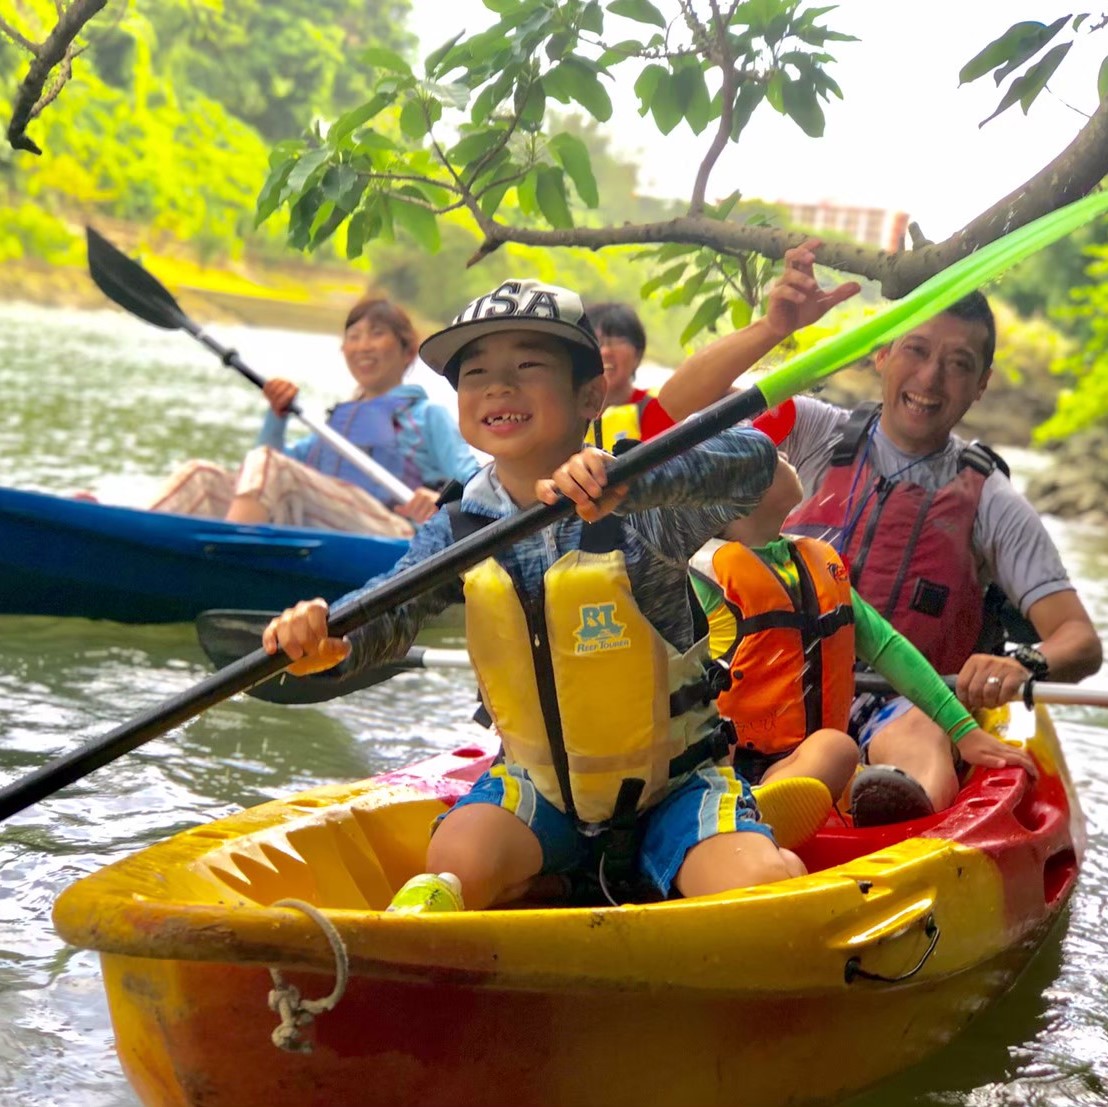 Okinawa/Kadena [Family discount] 1 child free & half price! Mangrove kayaking can be enjoyed by ages 2 and above♪ (Same-day reservations accepted, free shooting data, free smartphone case rental, hot showers available)